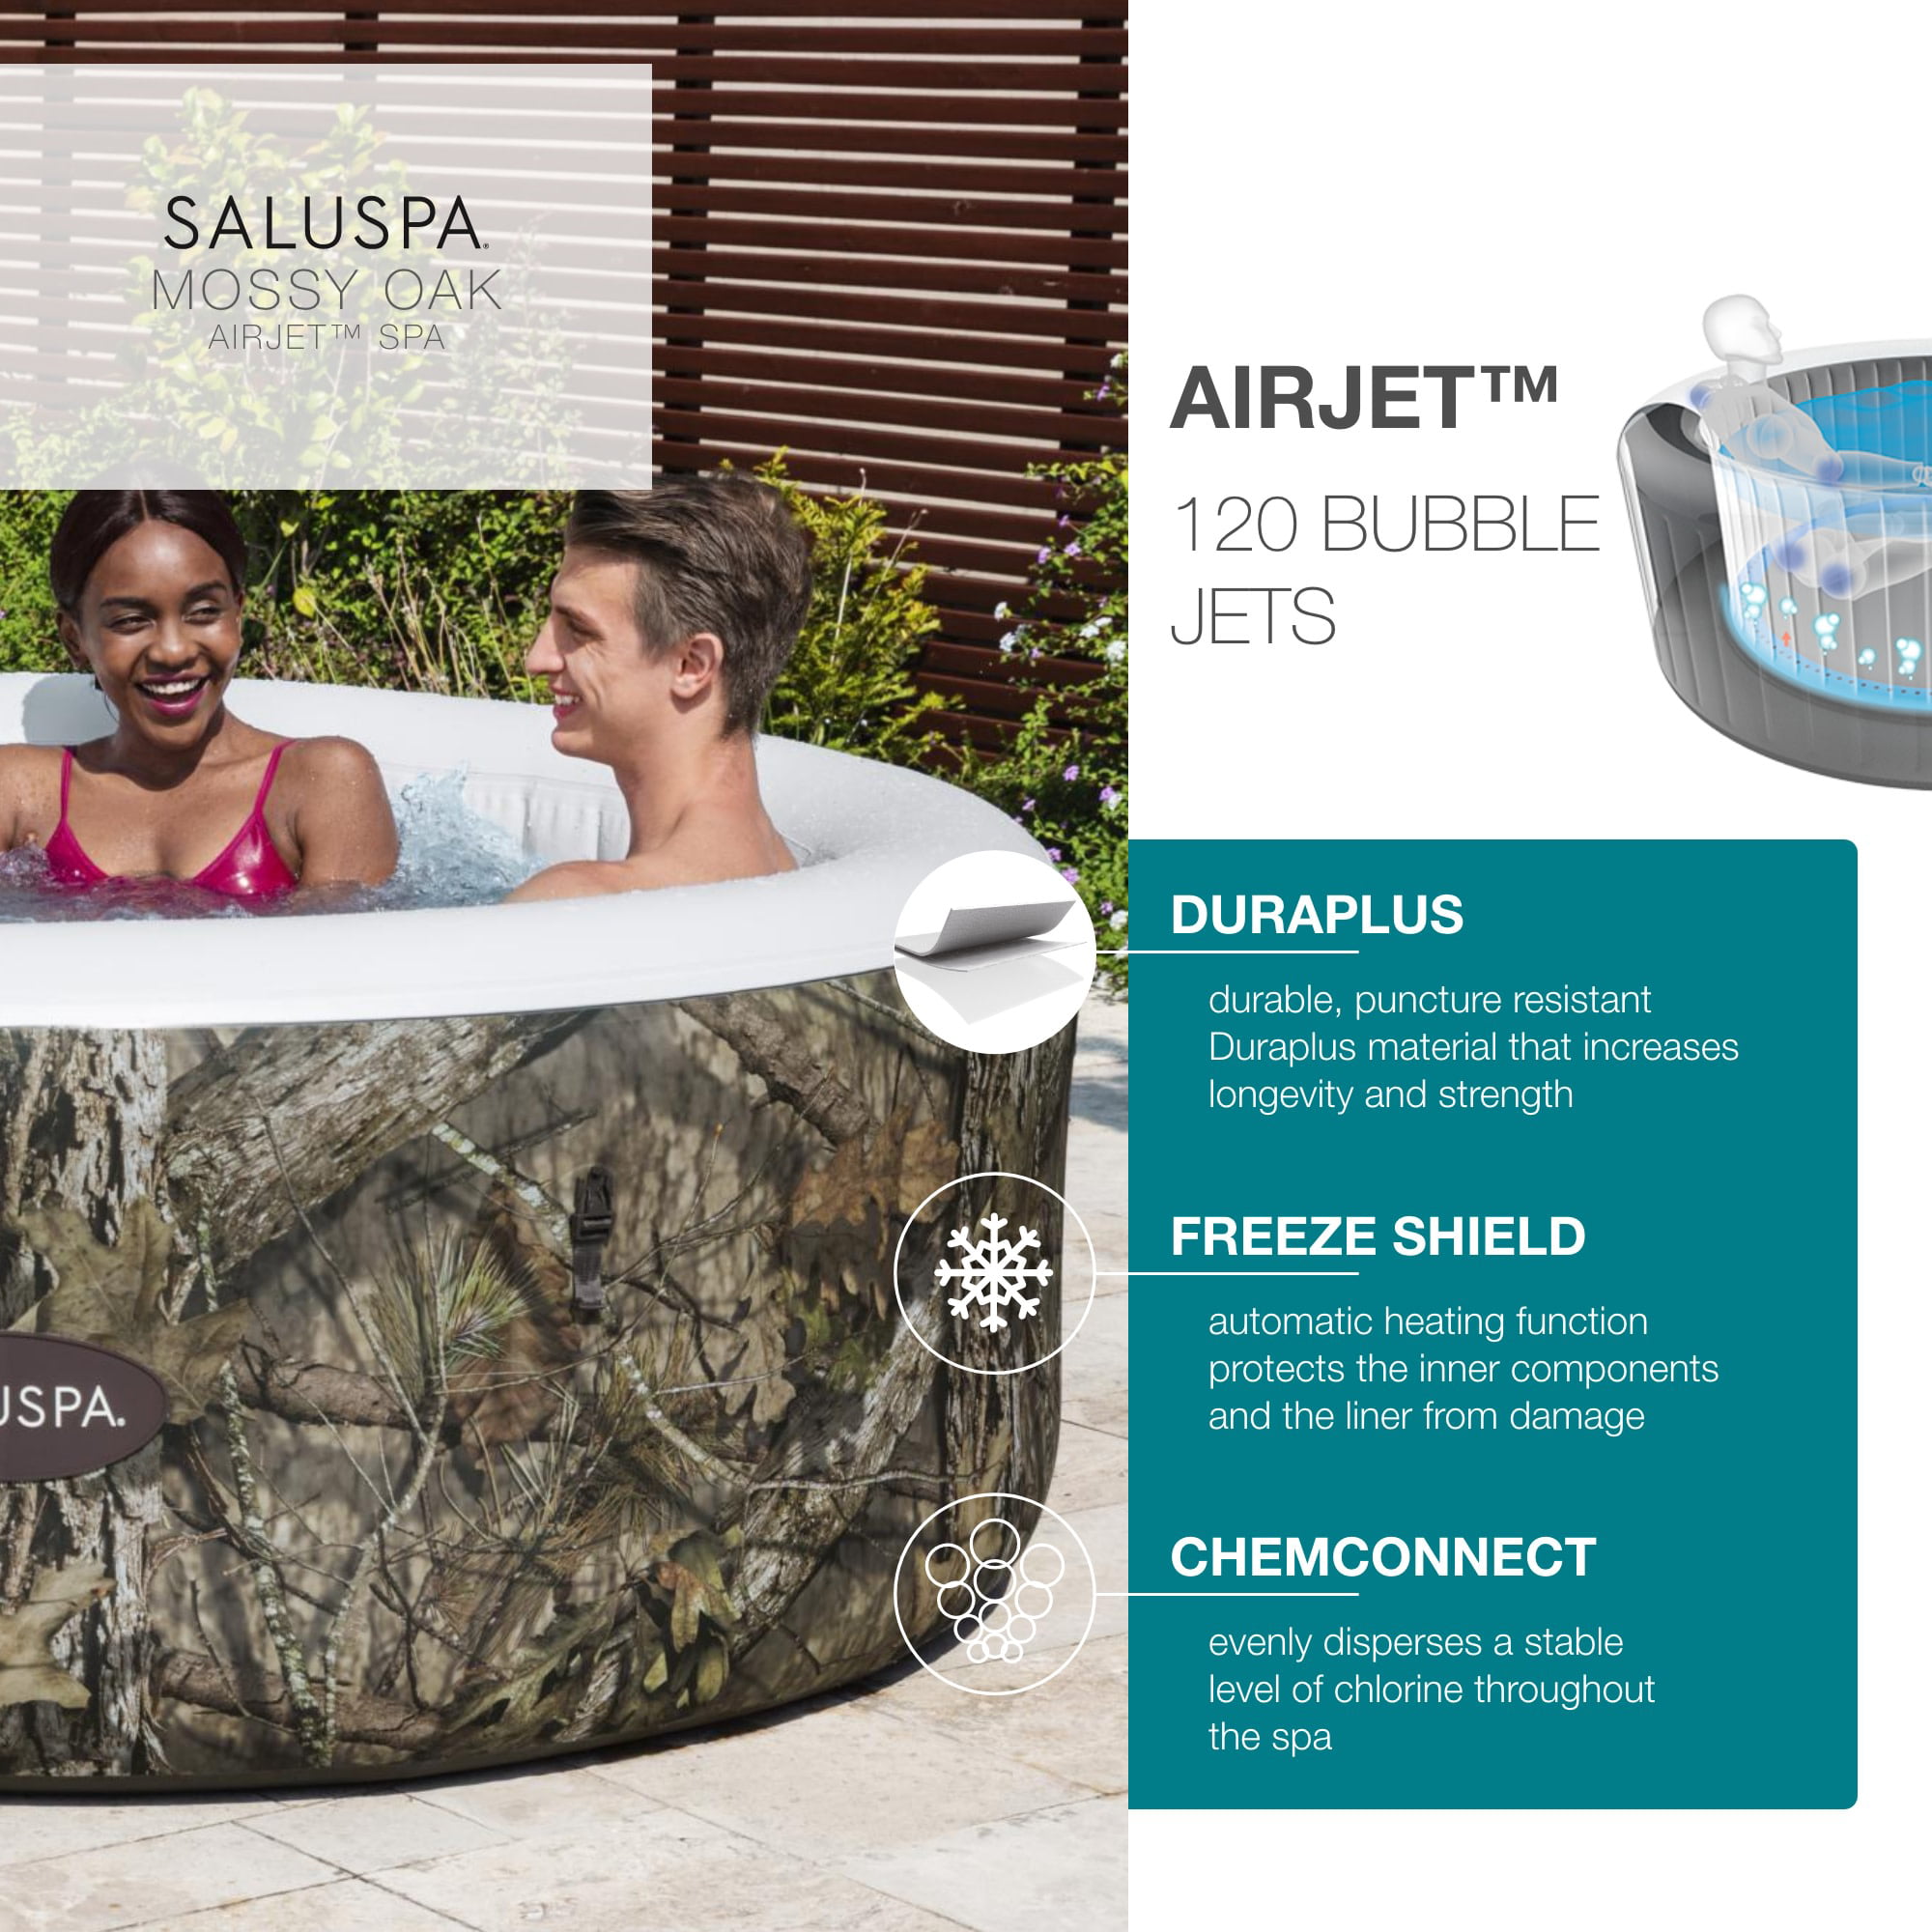 Mossy Oak Inflatable Hot Tub for Outdoors (or Outdoors Inflatable Hot Tub)